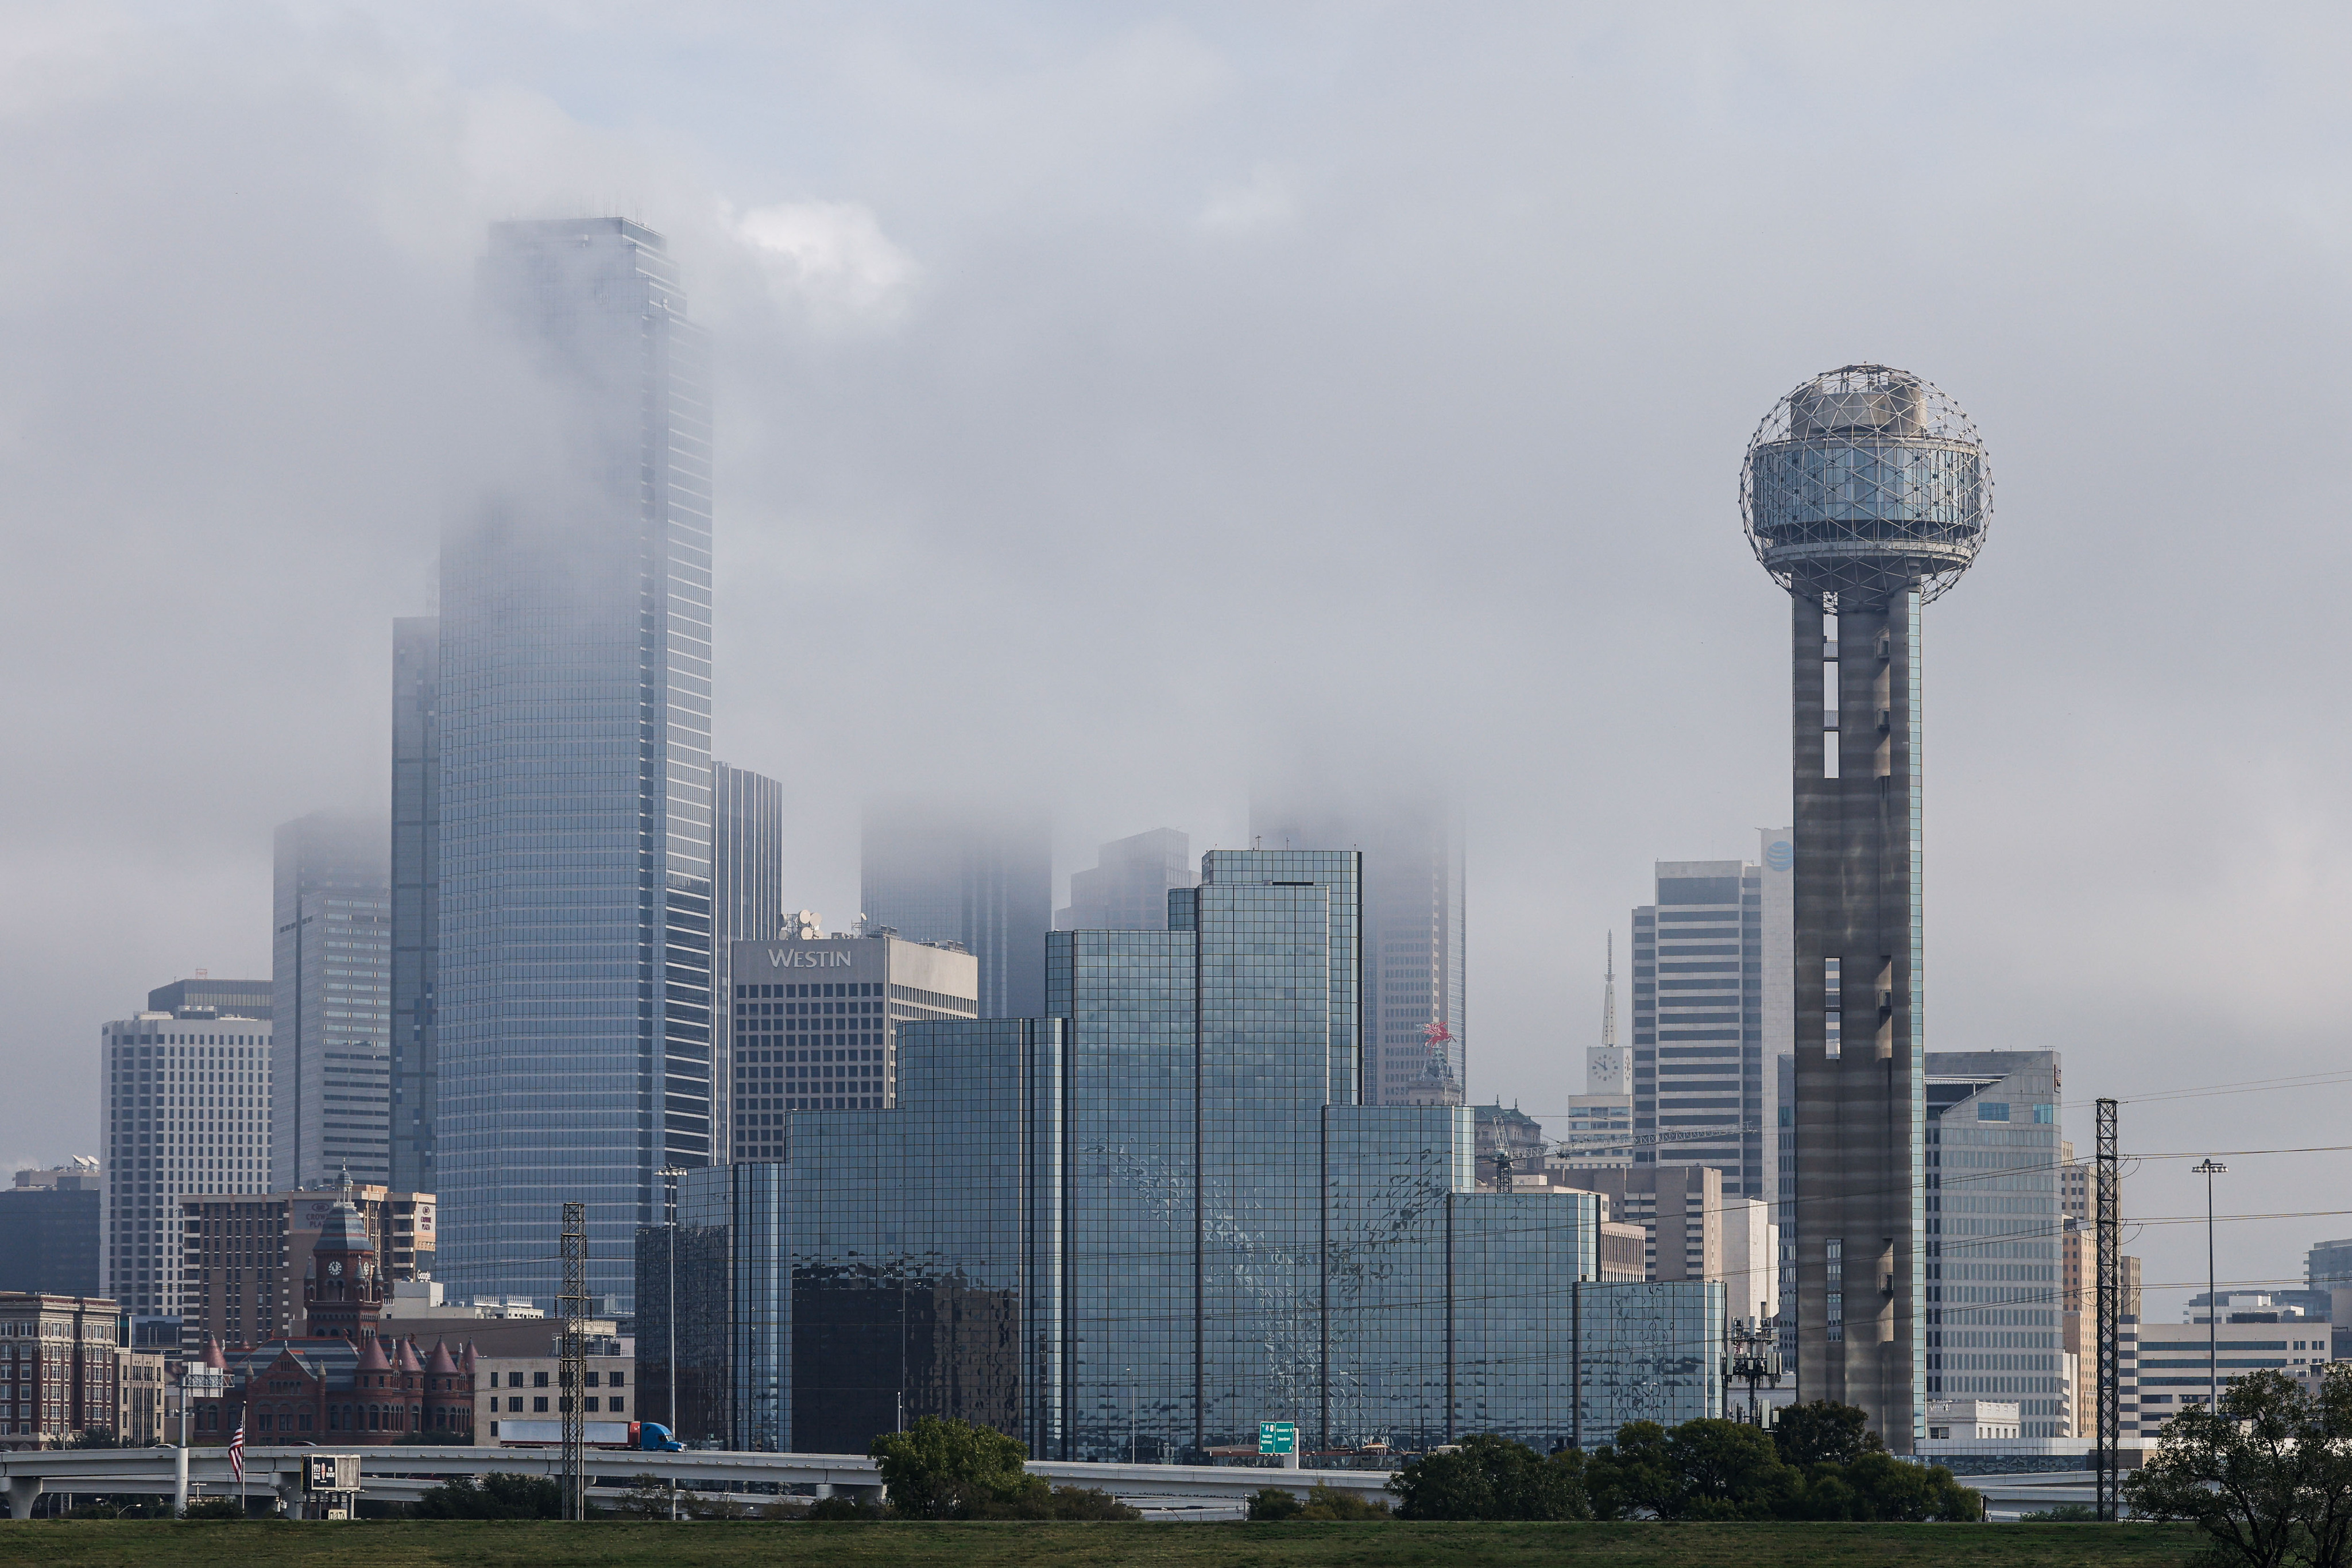 Downtown Dallas during a foggy morning.